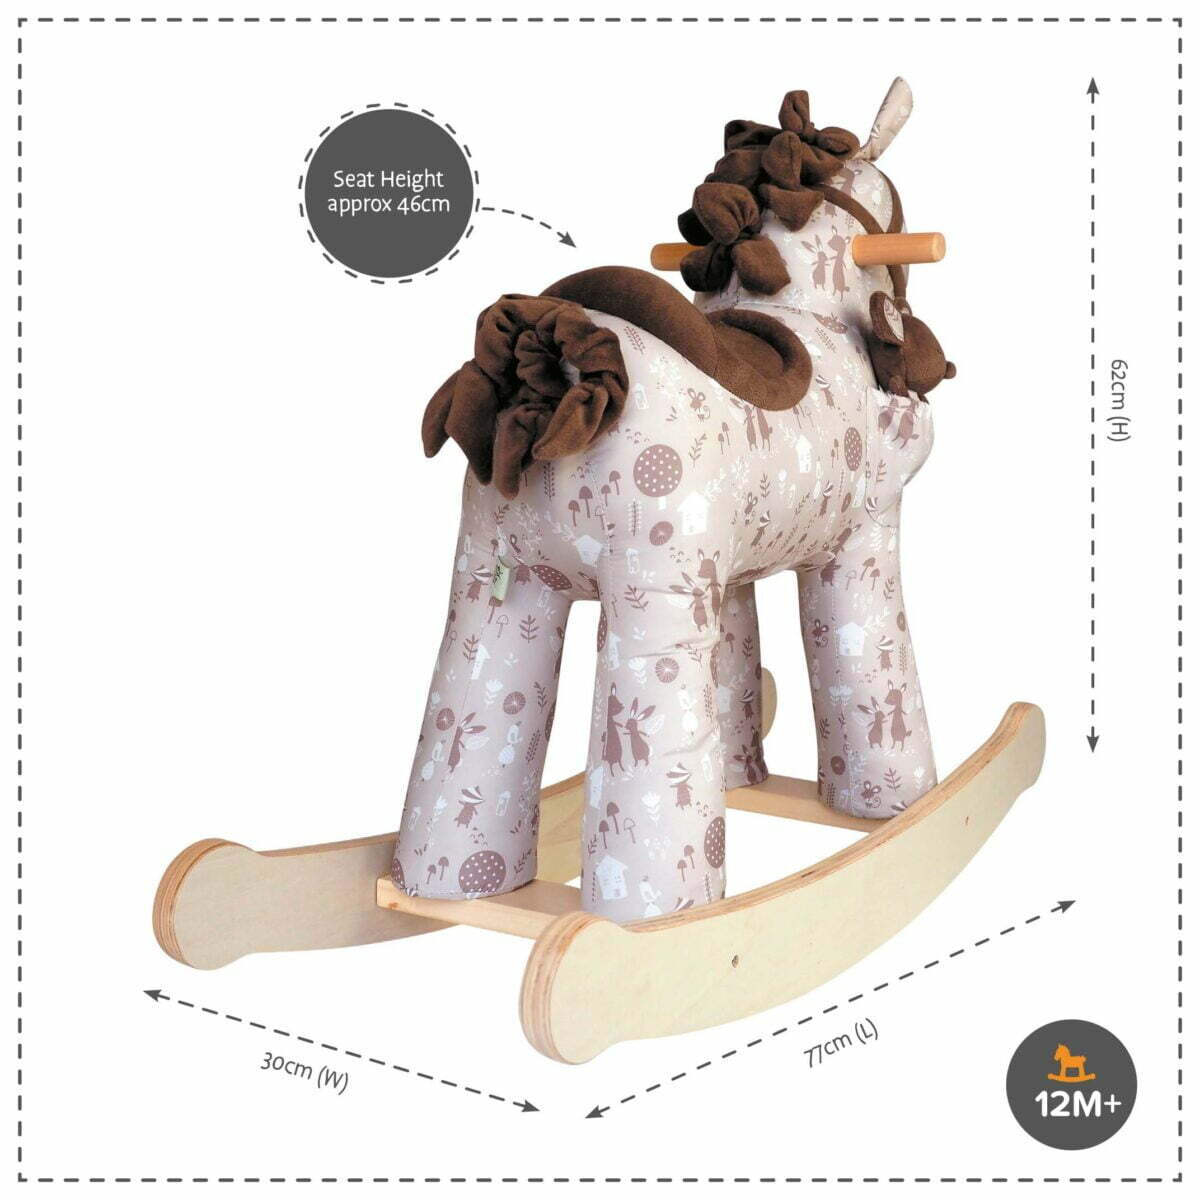 Product dimensions displayed for Biscuit & Skip Rocking Horse 12m+